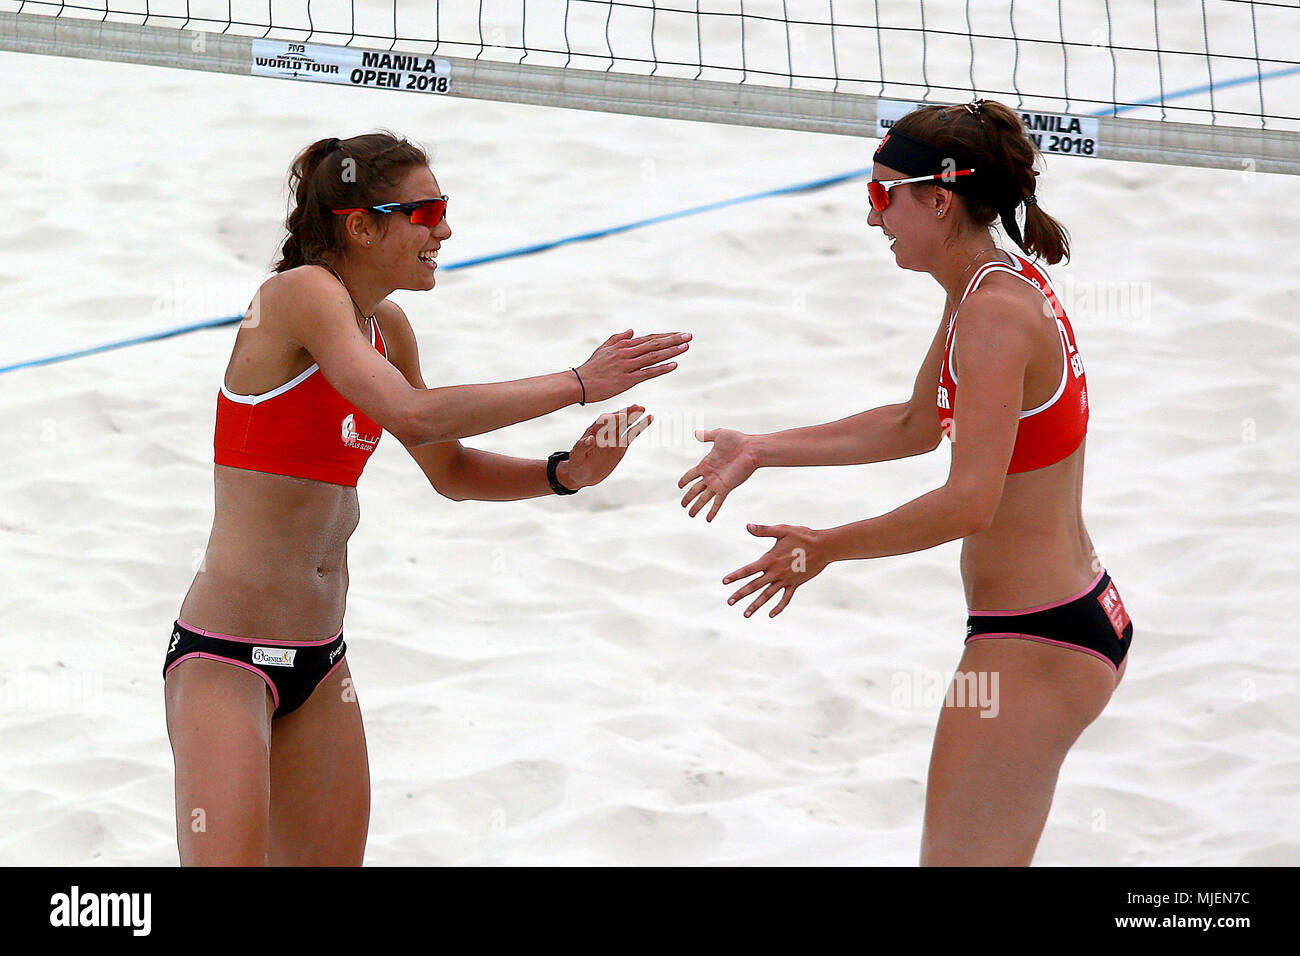 Manila, Philippines. 5th May, 2018. Germany's Leonie Klinke (L) /Lisa-Sophie Kotzan celebrate after scoring during the women's round of 12 match between Germany's Leonie Klinke/Lisa-Sophie Kotzan and Katja Stam/Julia Wouters of the Netherlands at the FIVB Beach Volleyball World Tour in Manila, the Philippines, on May 5, 2018. Germany's Leonie Klinke/Lisa-Sophie Kotzan won by 2-0. Credit: Rouelle Umali/Xinhua/Alamy Live News Stock Photo